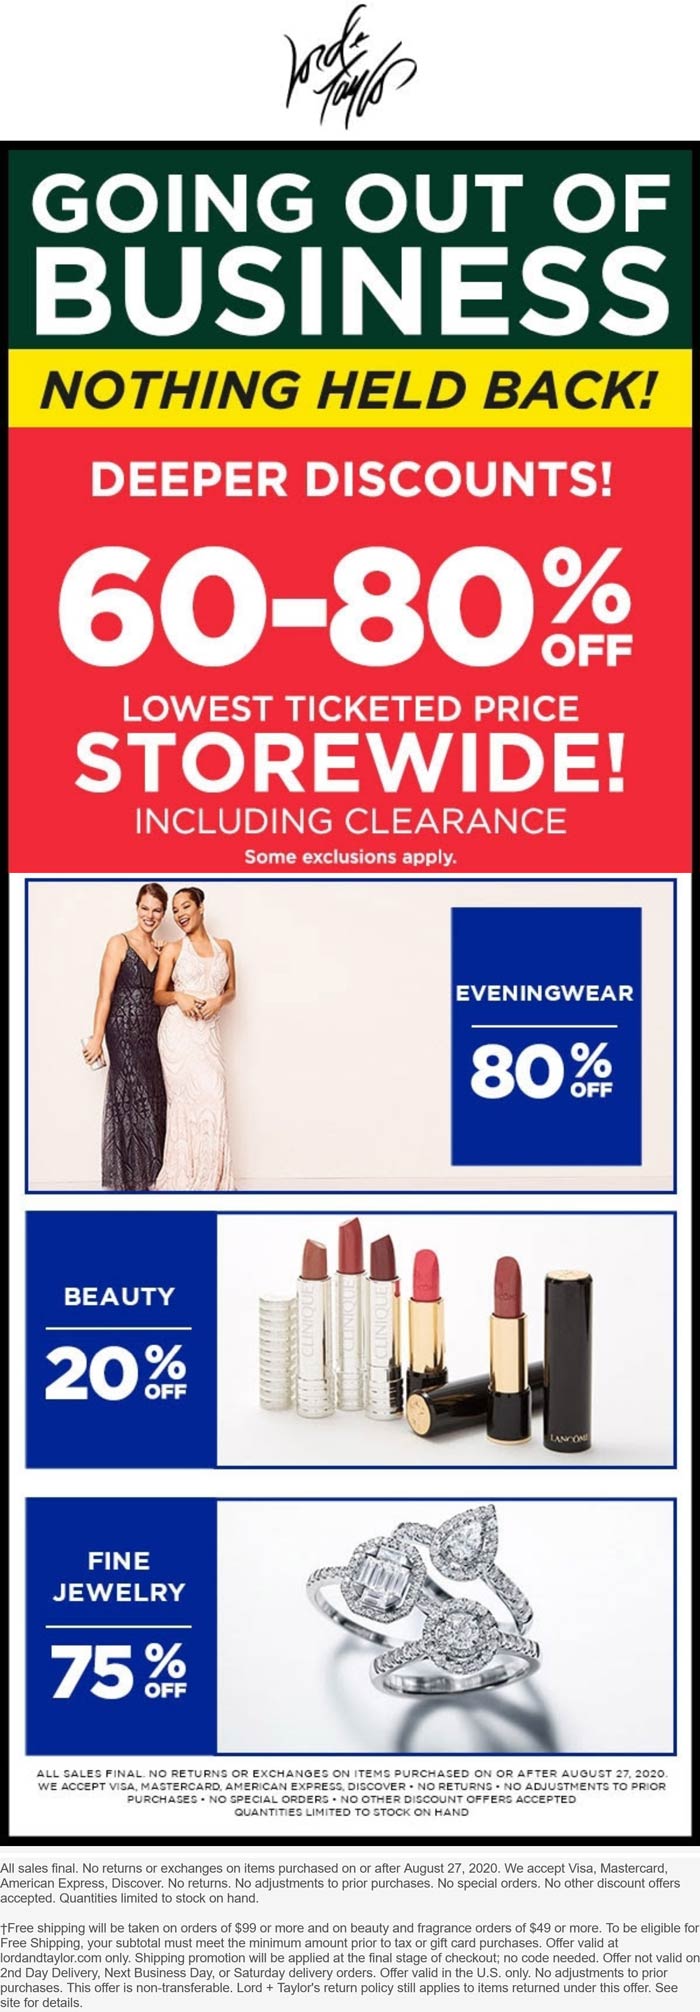 Lord & Taylor stores Coupon  Out-of-business 60-80% off lowest price at Lord & Taylor, ditto online #lordtaylor 